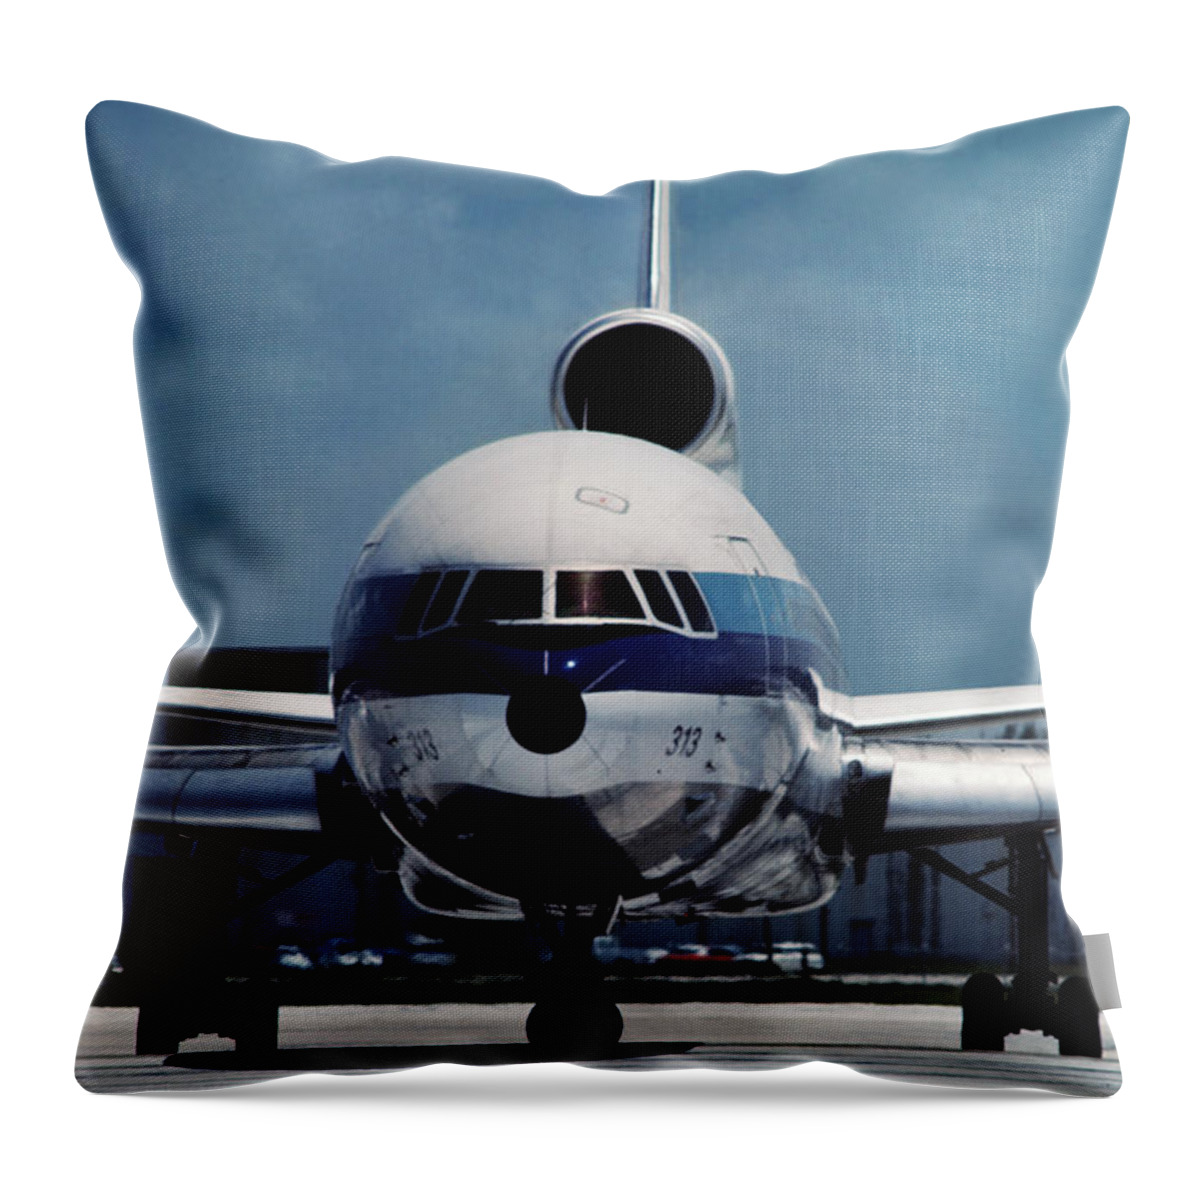 Eastern Airlines Throw Pillow featuring the photograph Head-on Eastern Airlines L-1011 by Erik Simonsen